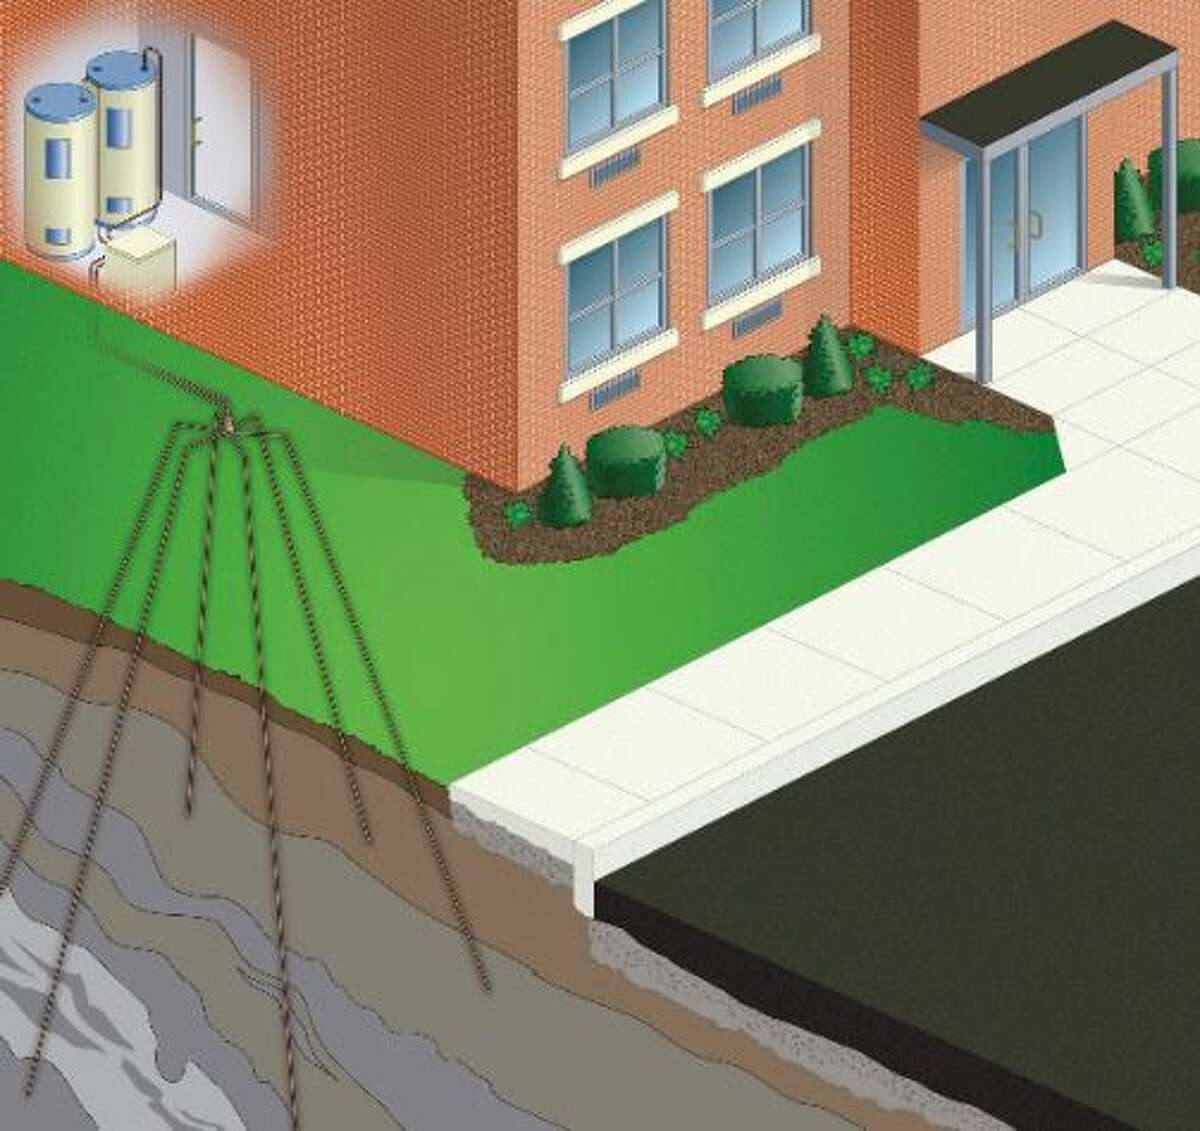 The U.S. Environmental Protection Agency (EPA) has released an Environmental Technology Verification (ETV) report confirming 400% efficiency of the EarthLinked Heat Pump Water Heating System. The hybrid system combines a high efficiency ground-source heat pump with a standard commercial water heater tank. GRAPHIC: Geothermal energy is transferred into a building where EarthLinked and water heater equipment produce large volumes of hot water for a variety of uses.